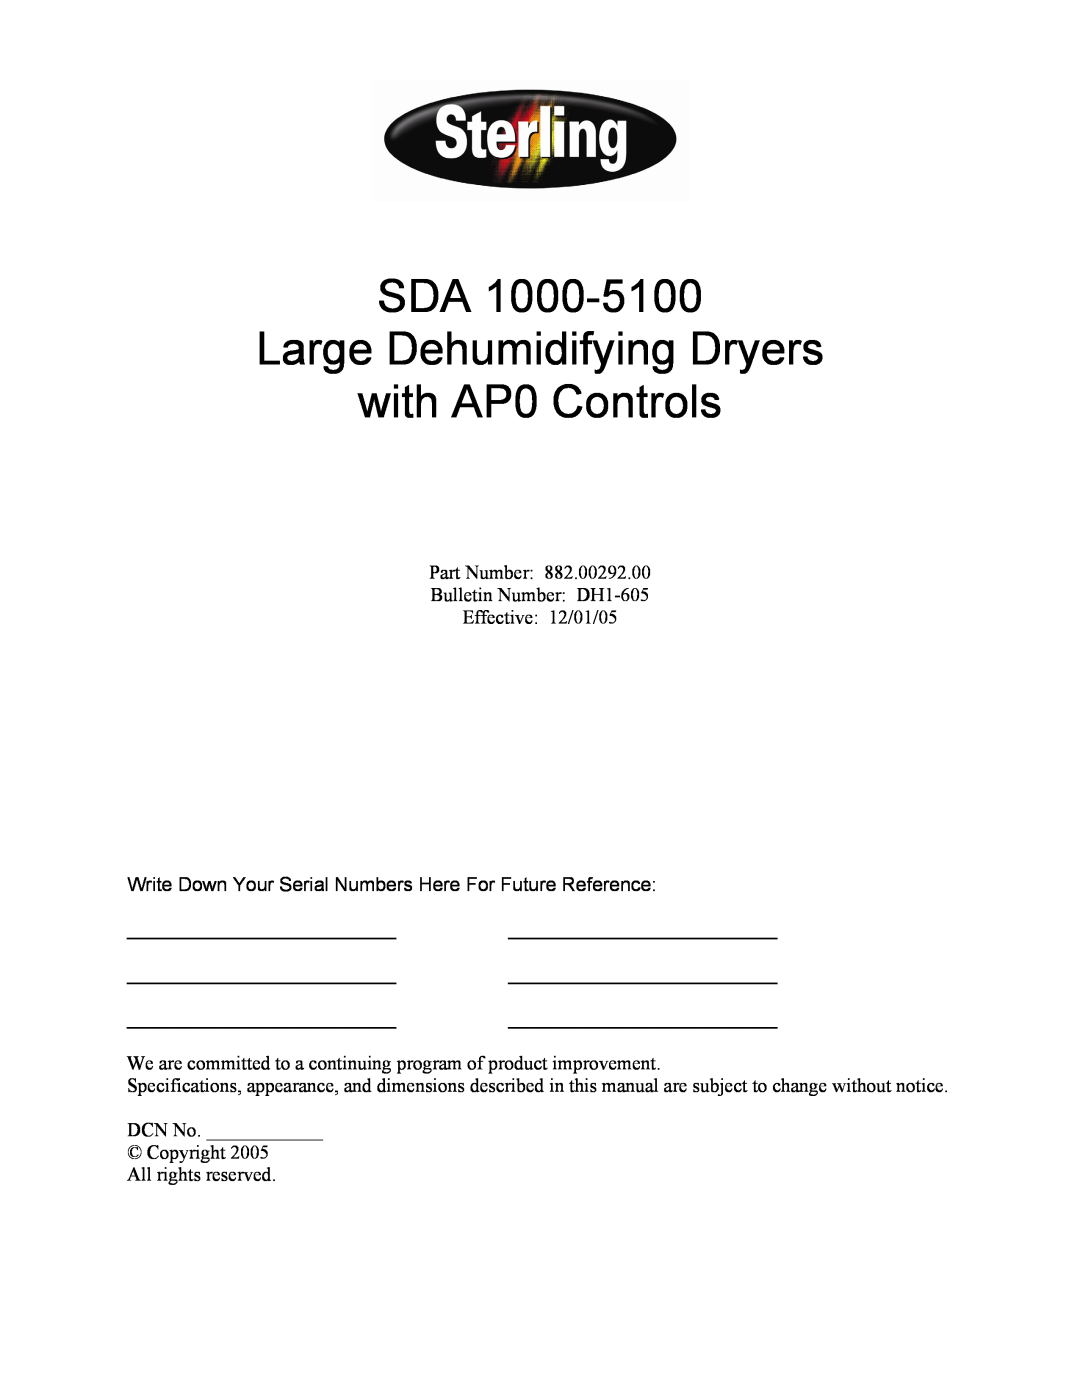 Sterling SDA 1000-5100 specifications SDA Large Dehumidifying Dryers with AP0 Controls 